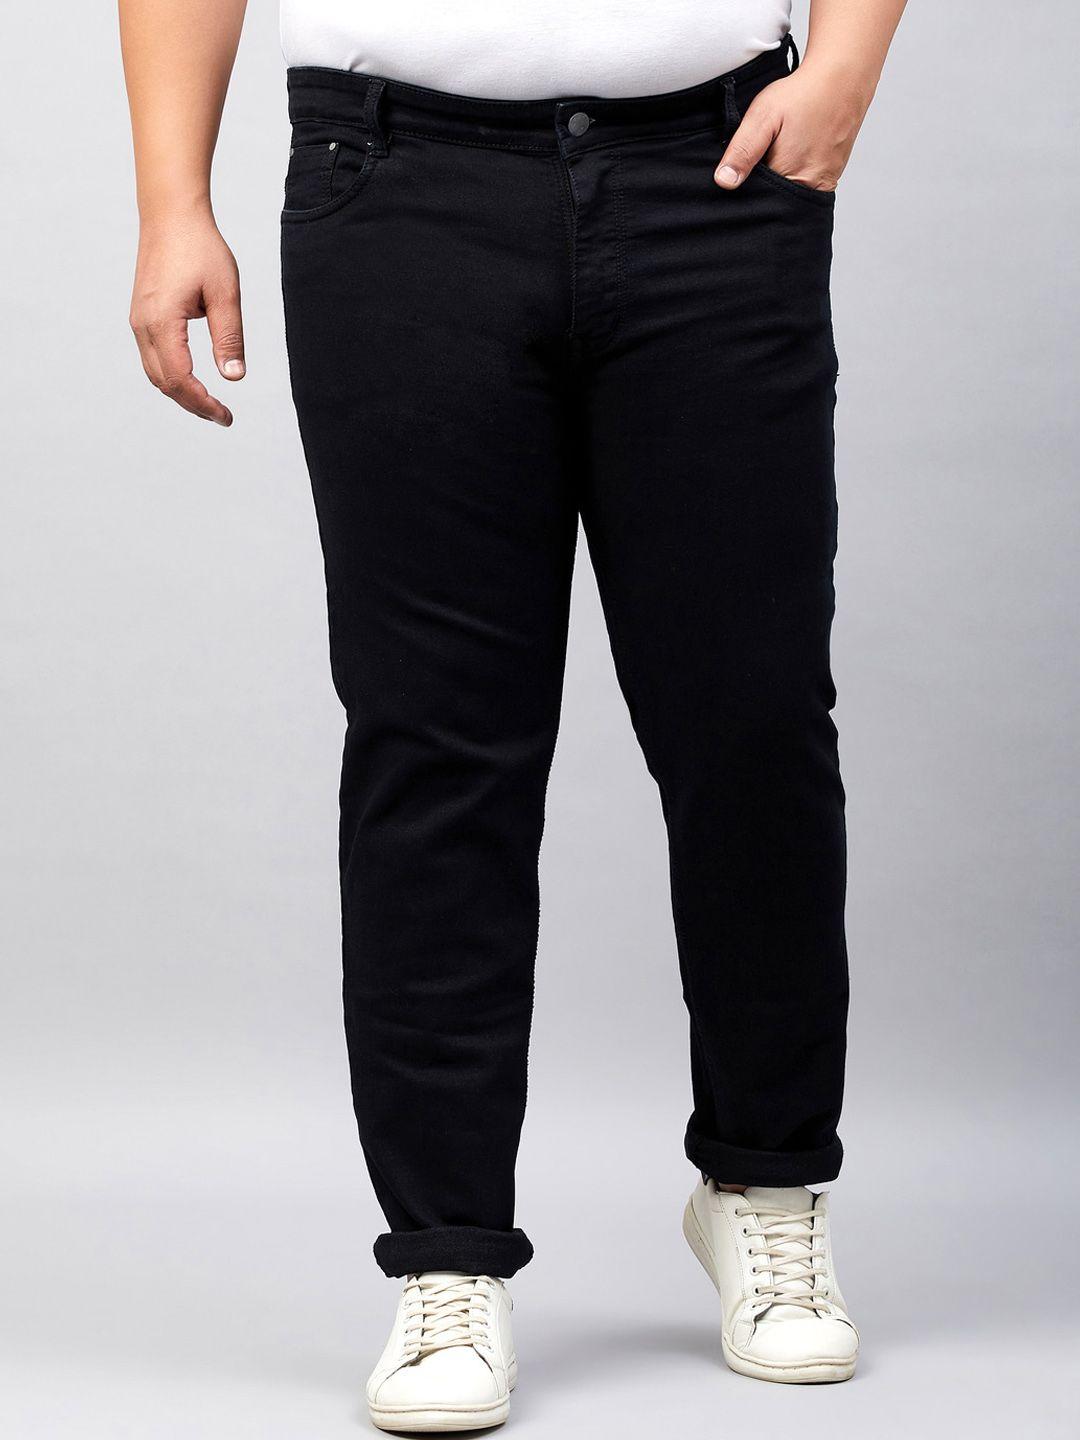 studio-nexx-men-plus-size-comfort-relaxed-fit-mid-rise-clean-look-stretchable-jeans